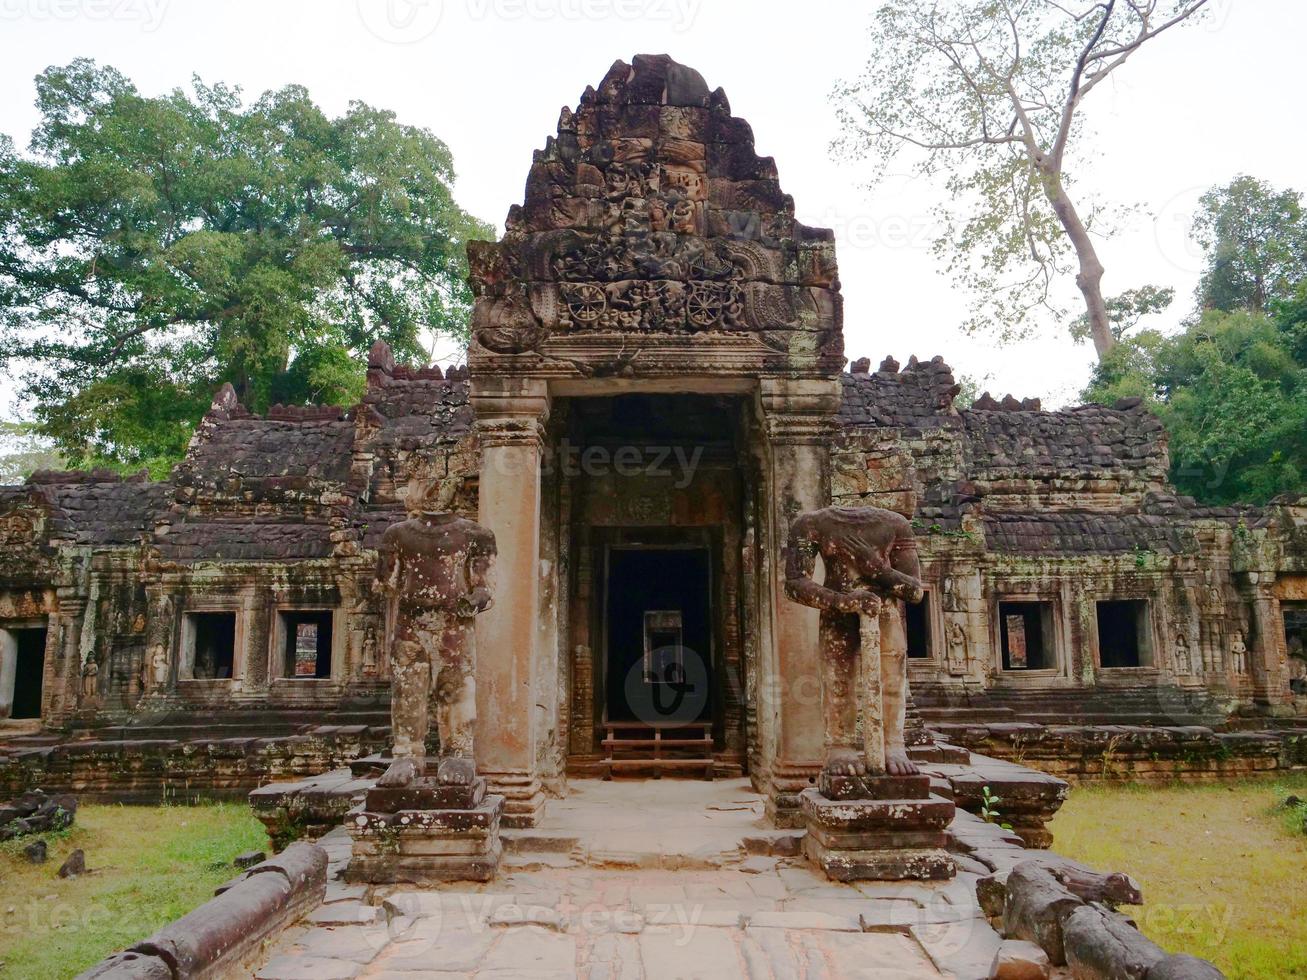 demolished stone architecture at Preah Khan temple, Siem Reap Cambodia photo